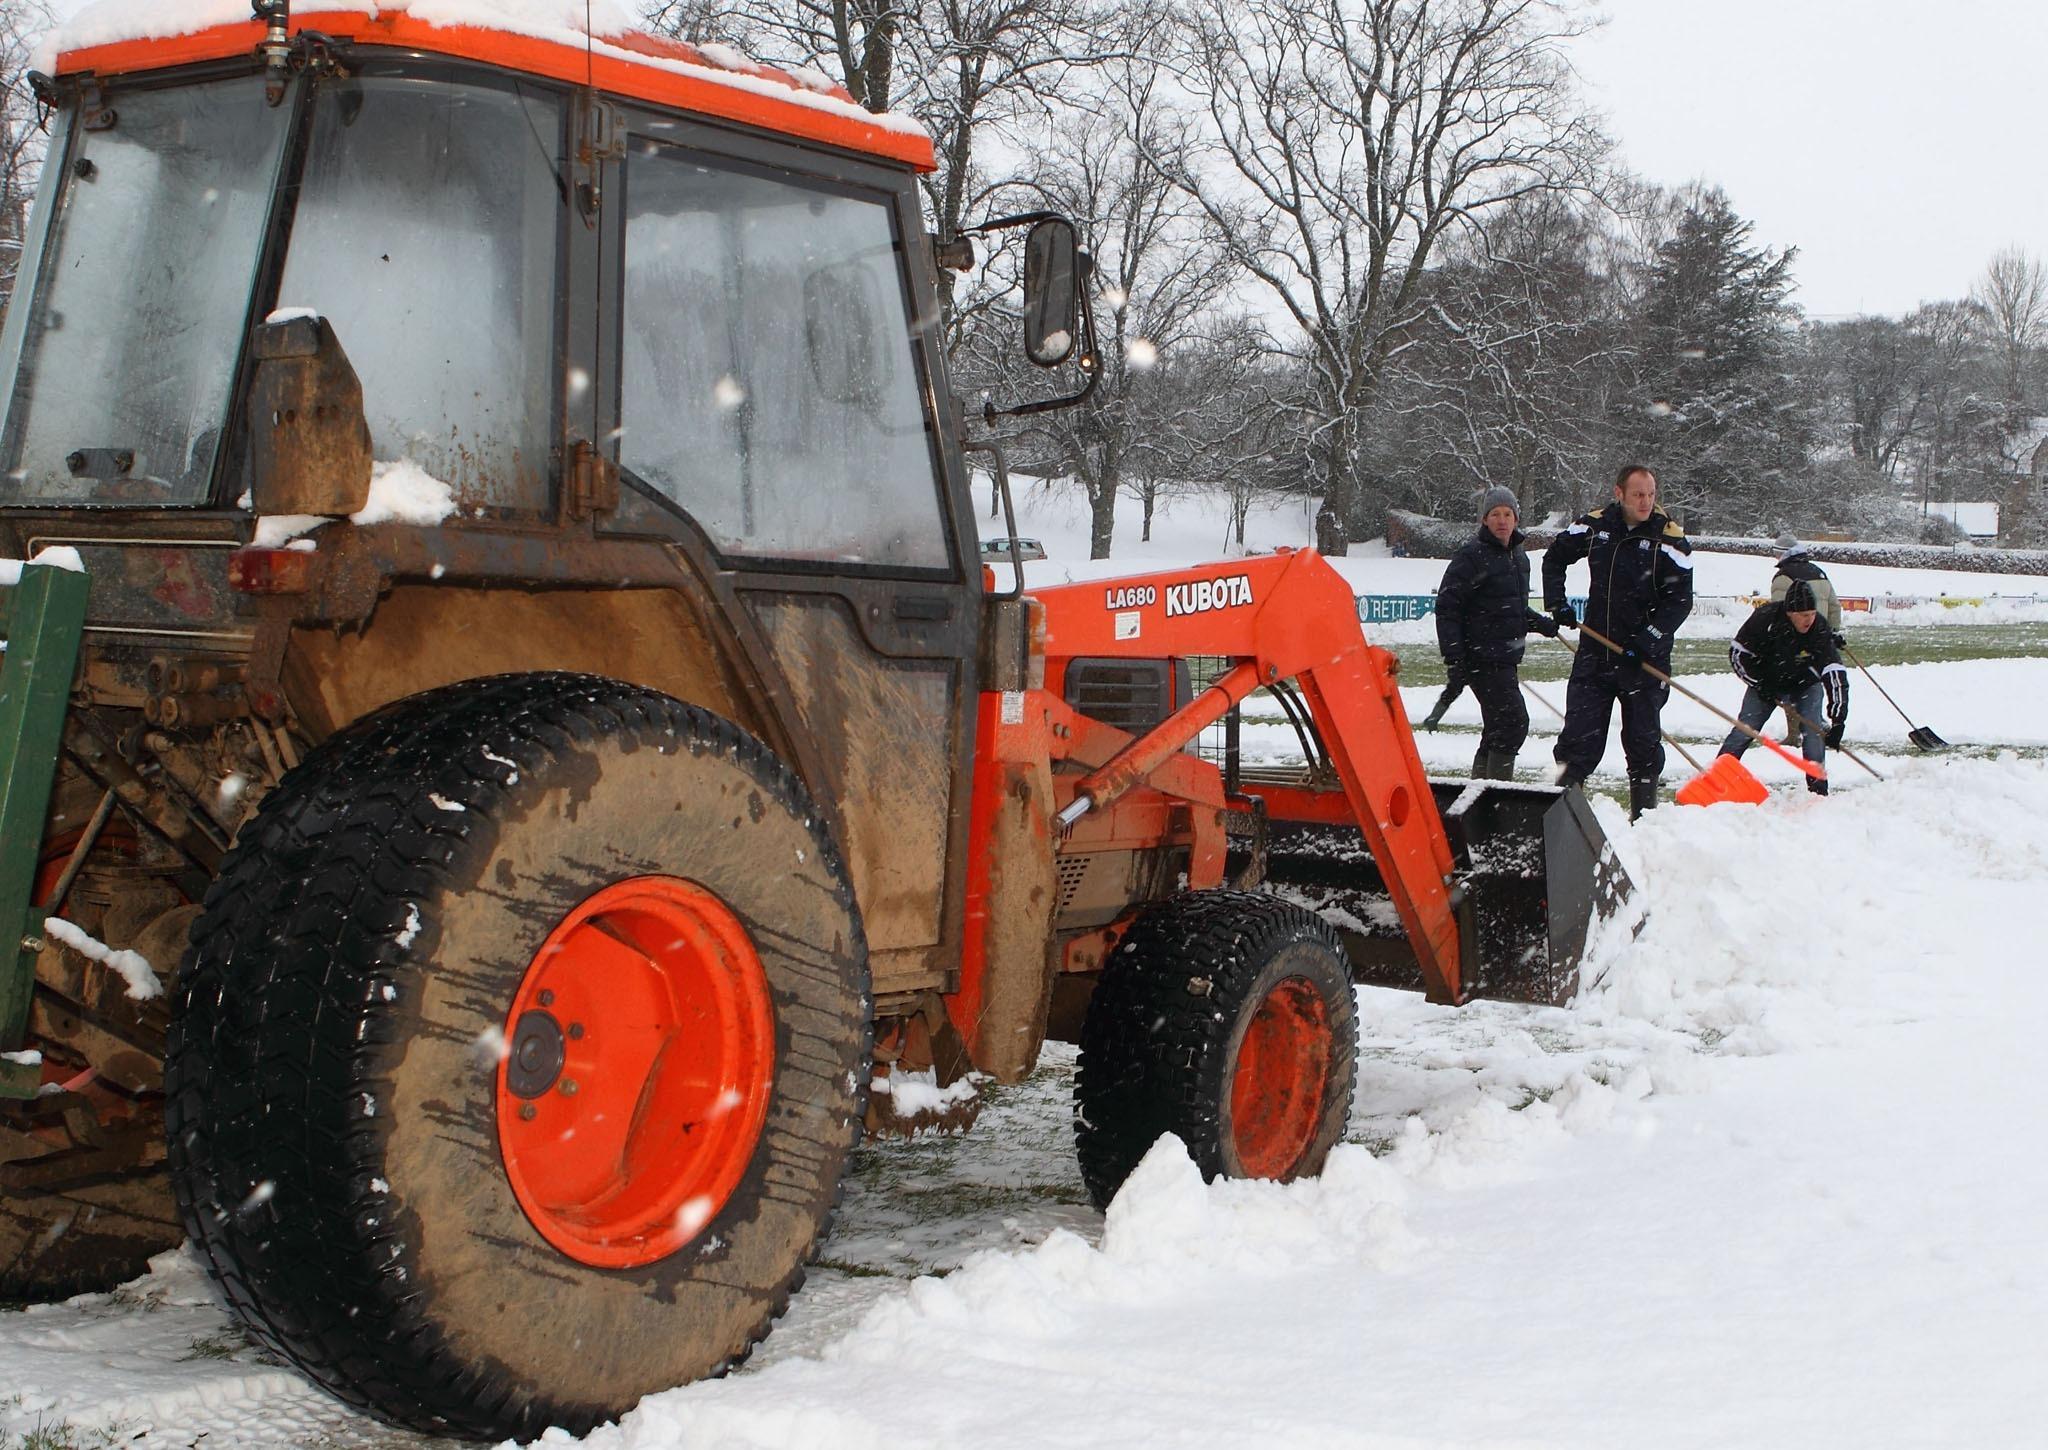 Clearing snow off the pitch at the Greenyards ahead of the game between Melrose and Doncaster.